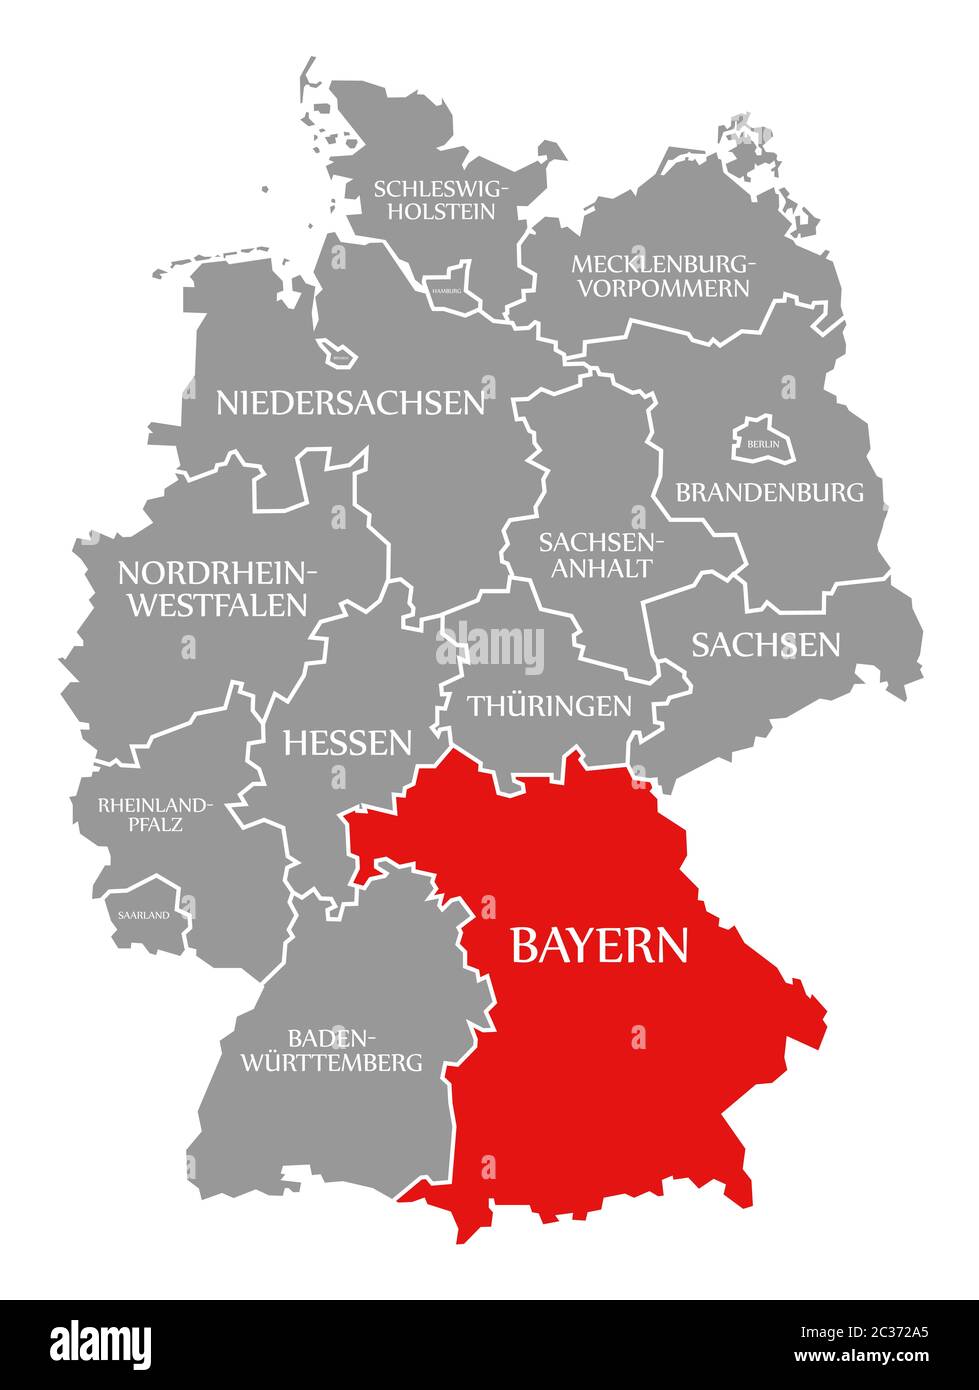 Bavaria red highlighted in map of Germany Stock Photo